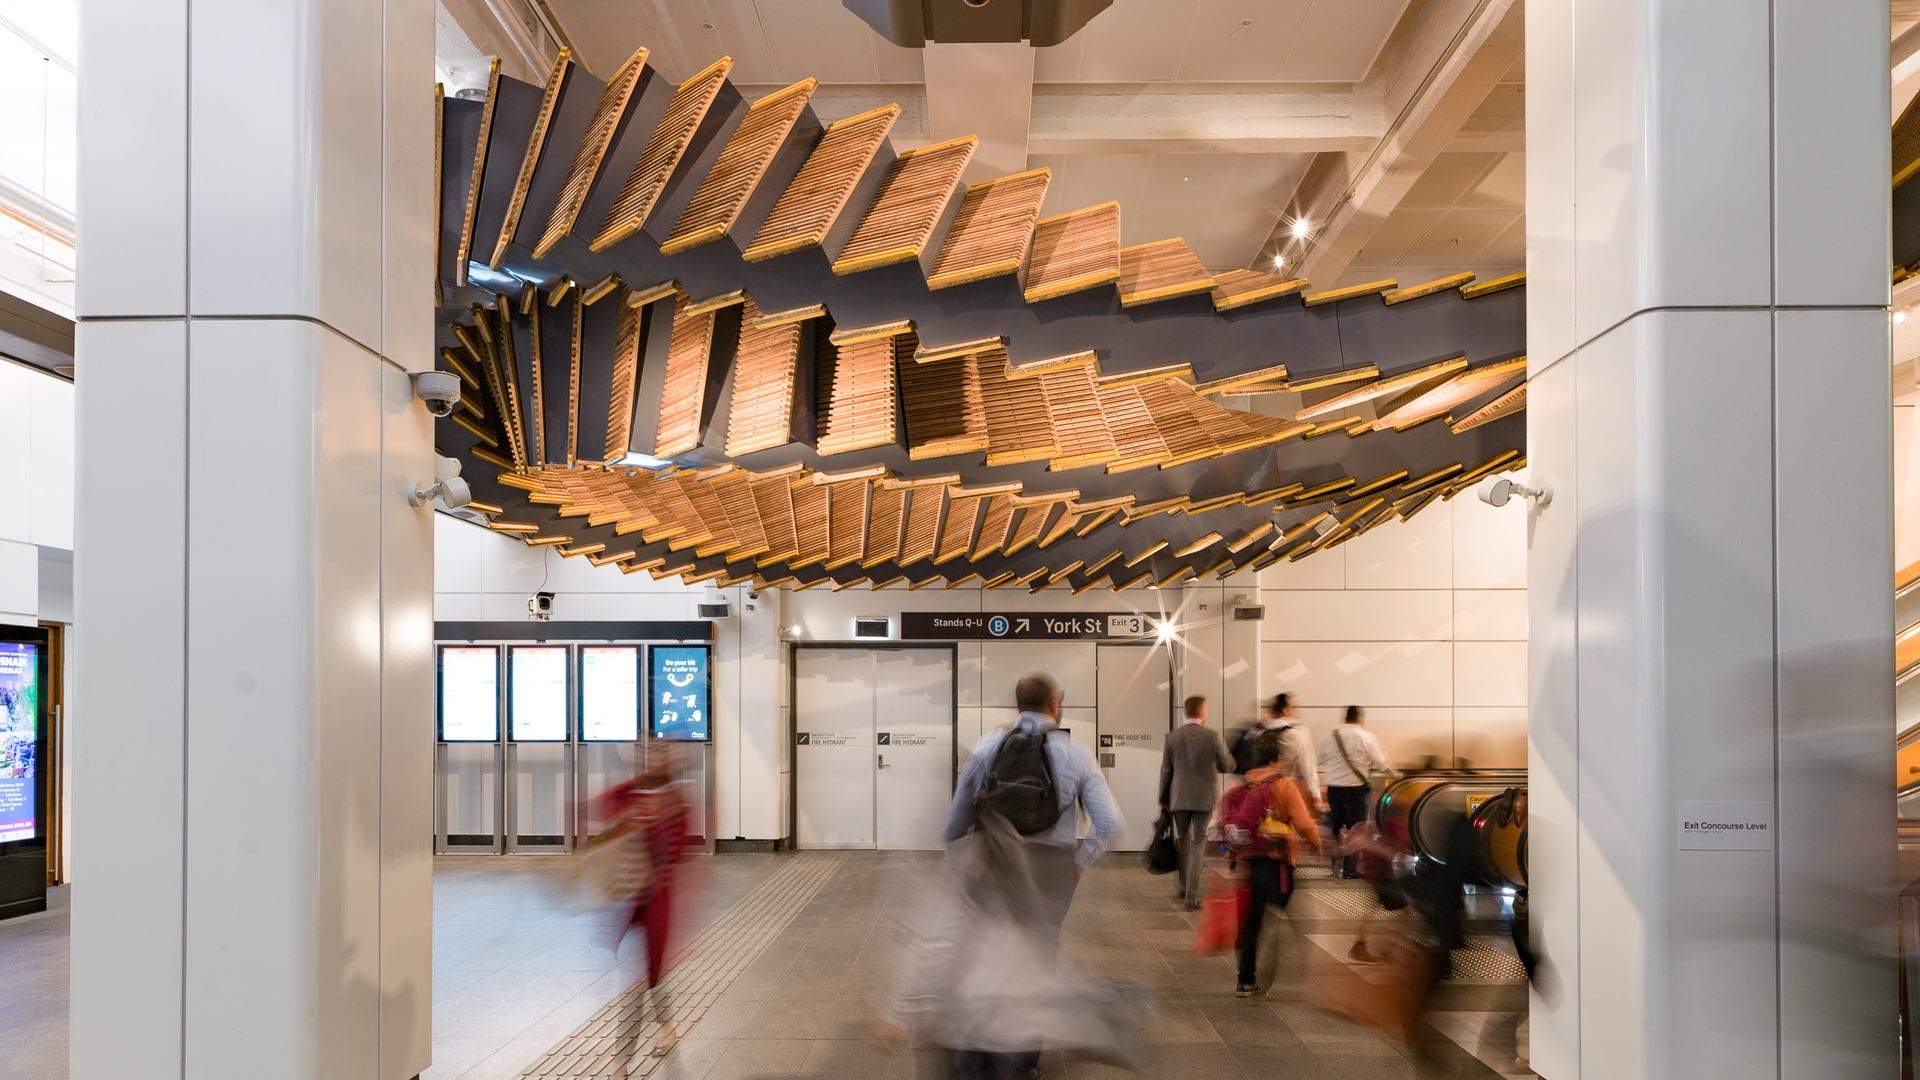 Wynyard Station Has an Epic New Hovering Concertina-Like Installation